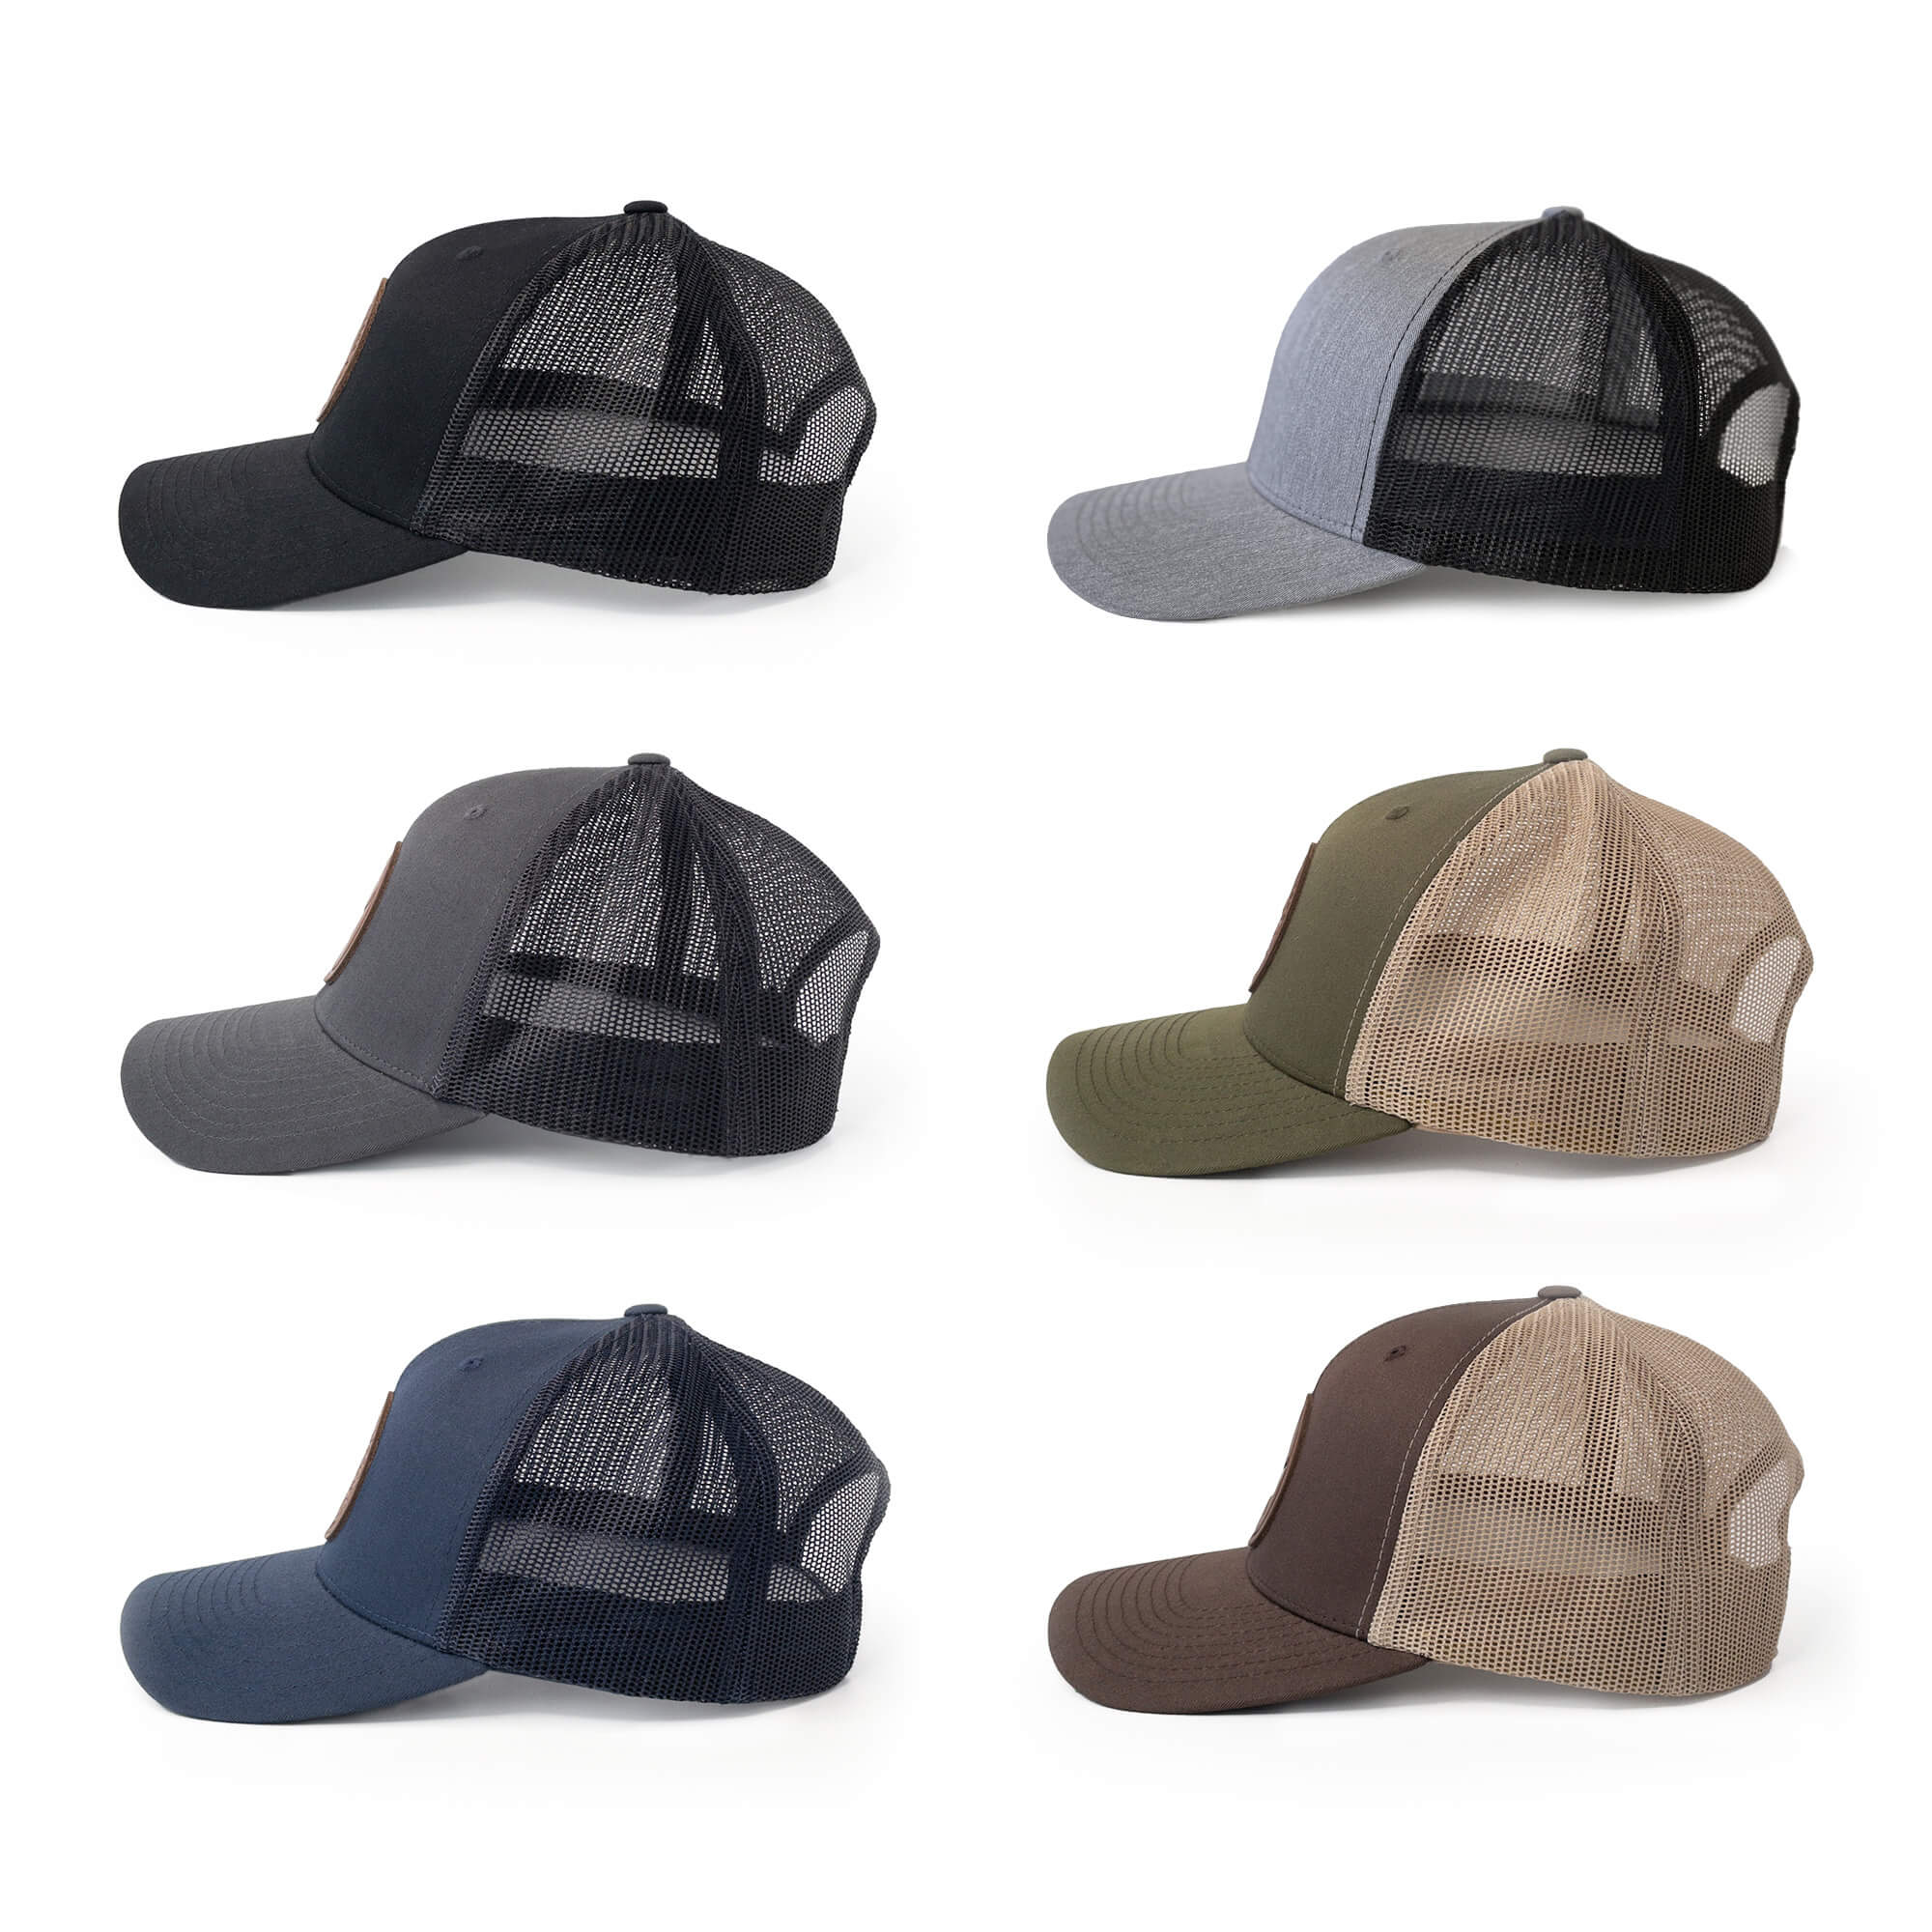 Leather patch trucker hats available in 6 colors | BLACK-007-005, CHARC-007-005, NAVY-007-005, HGREY-007-005, MOSS-007-005, BROWN-007-005